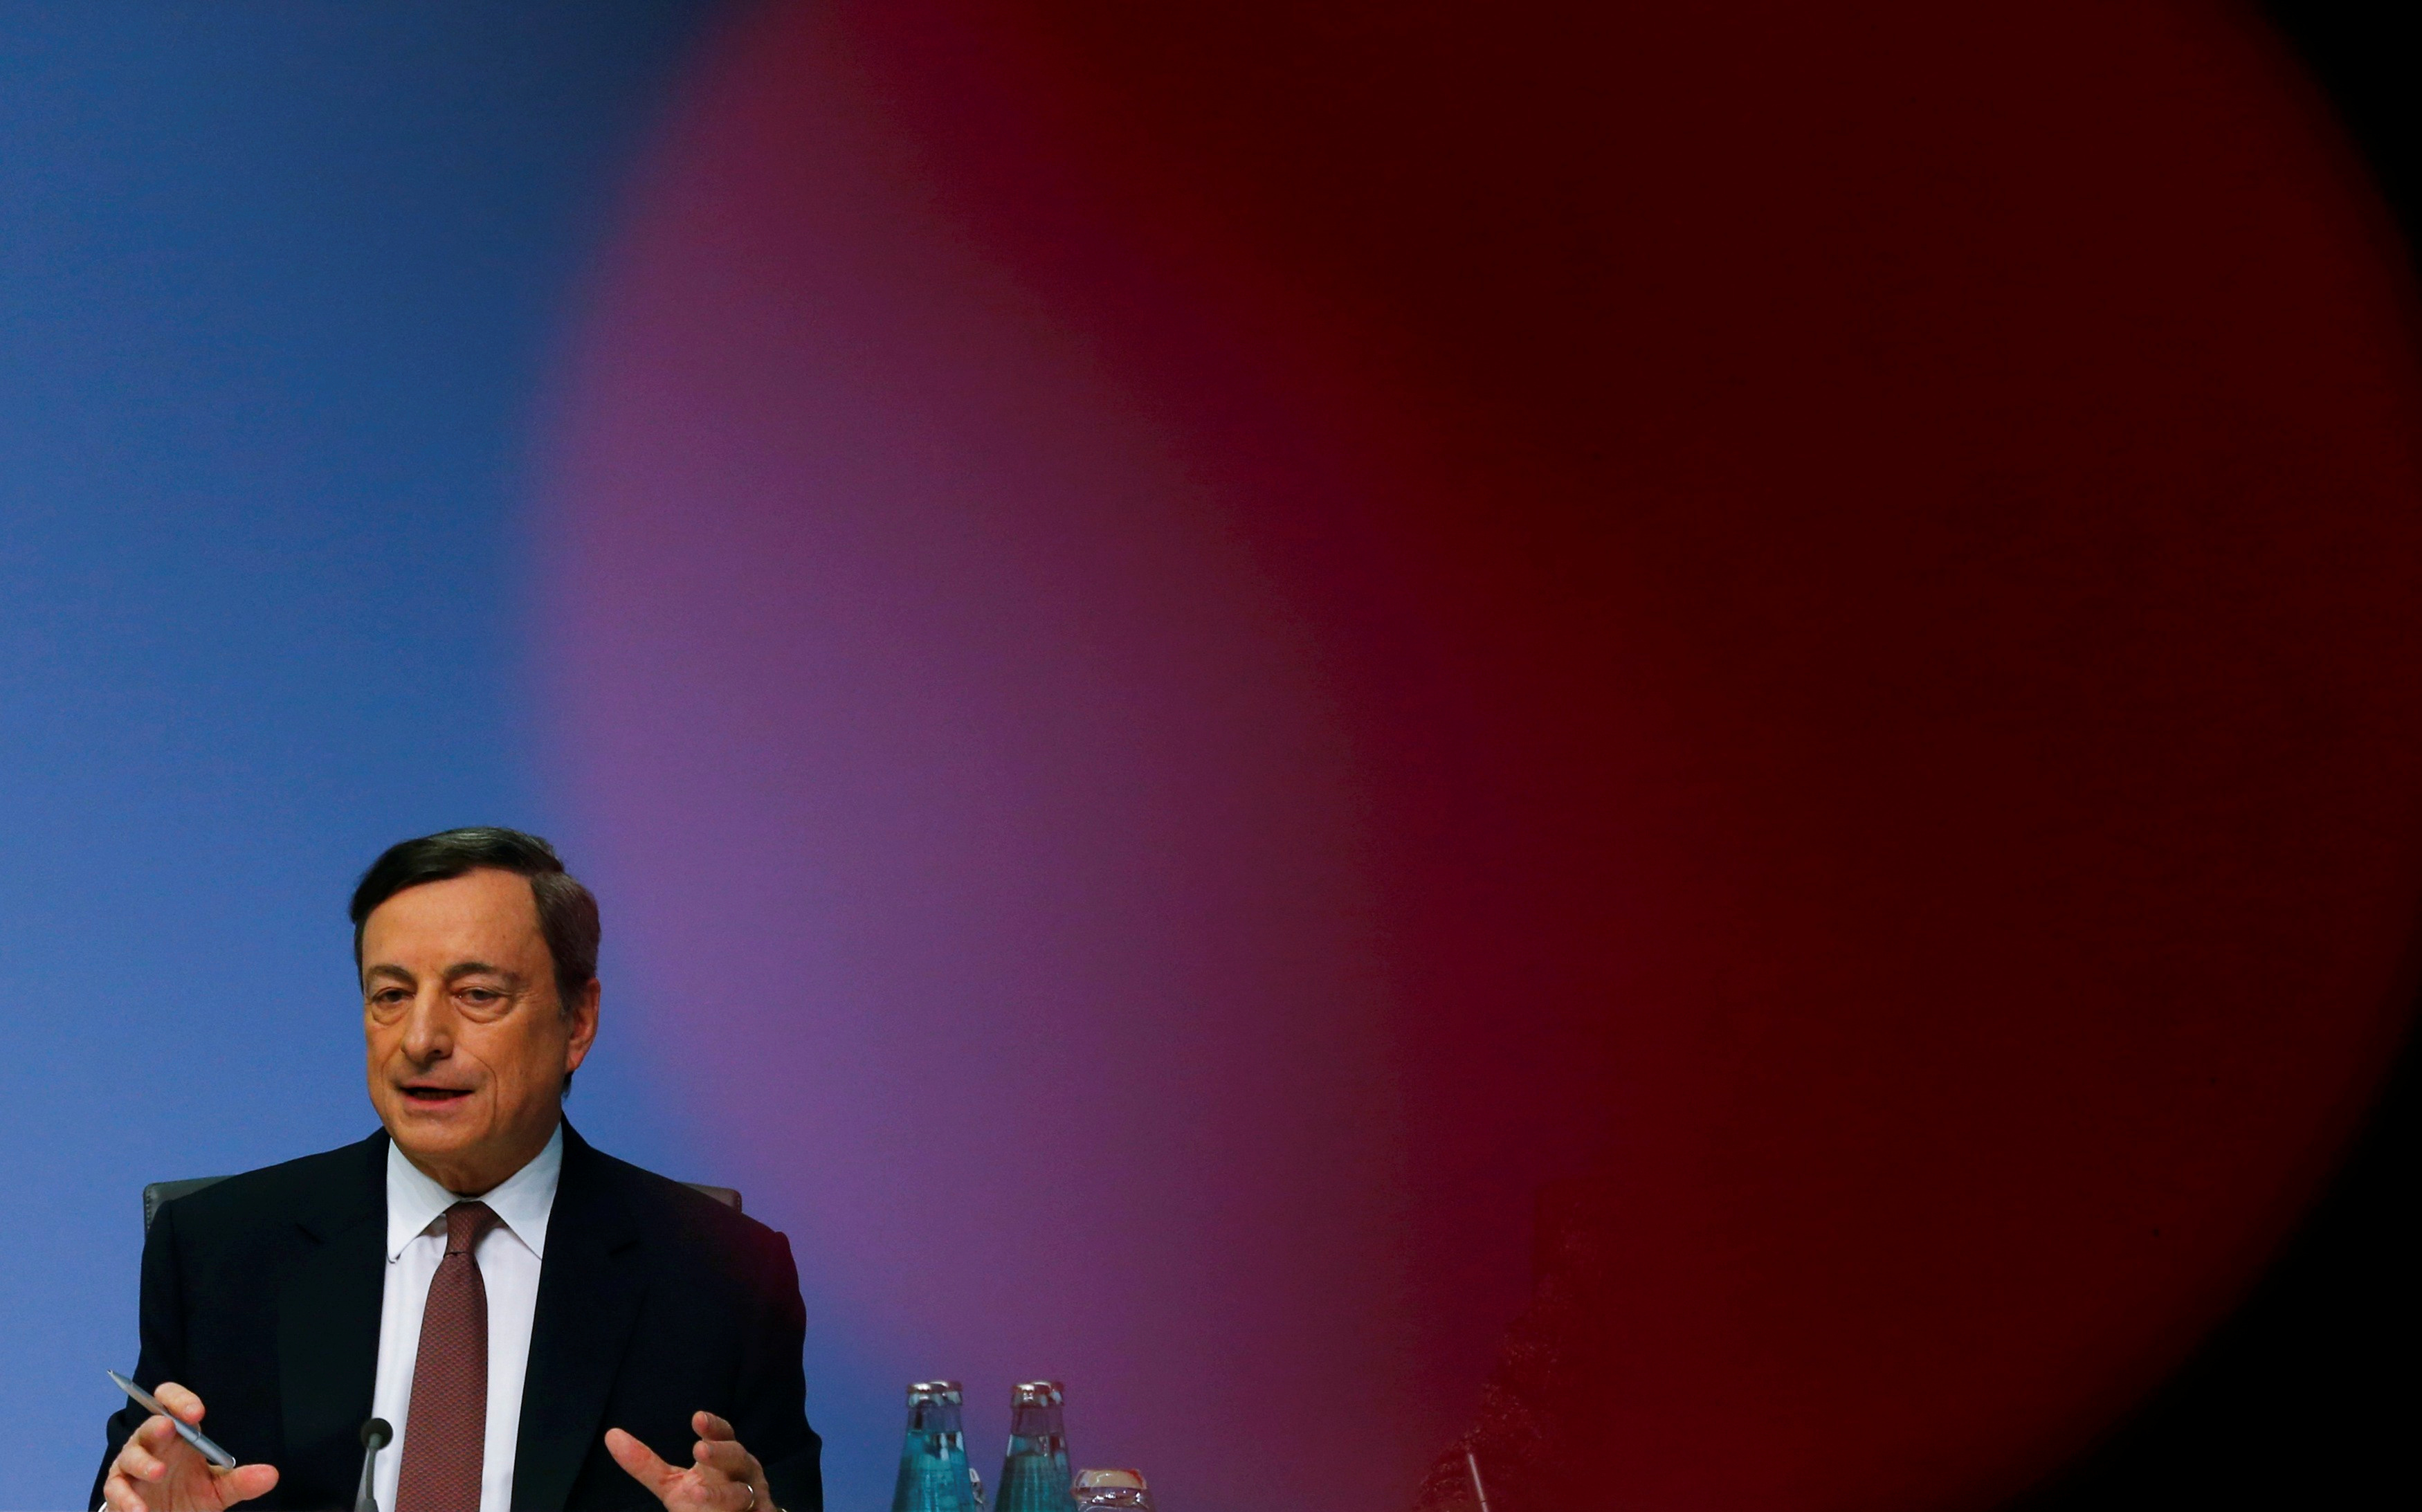 European Central Bank (ECB) President Mario Draghi speaks during a news conference at the ECB headquarters in Frankfurt, Germany, April 21, 2016.   REUTERS/Ralph Orlowski /File Photo